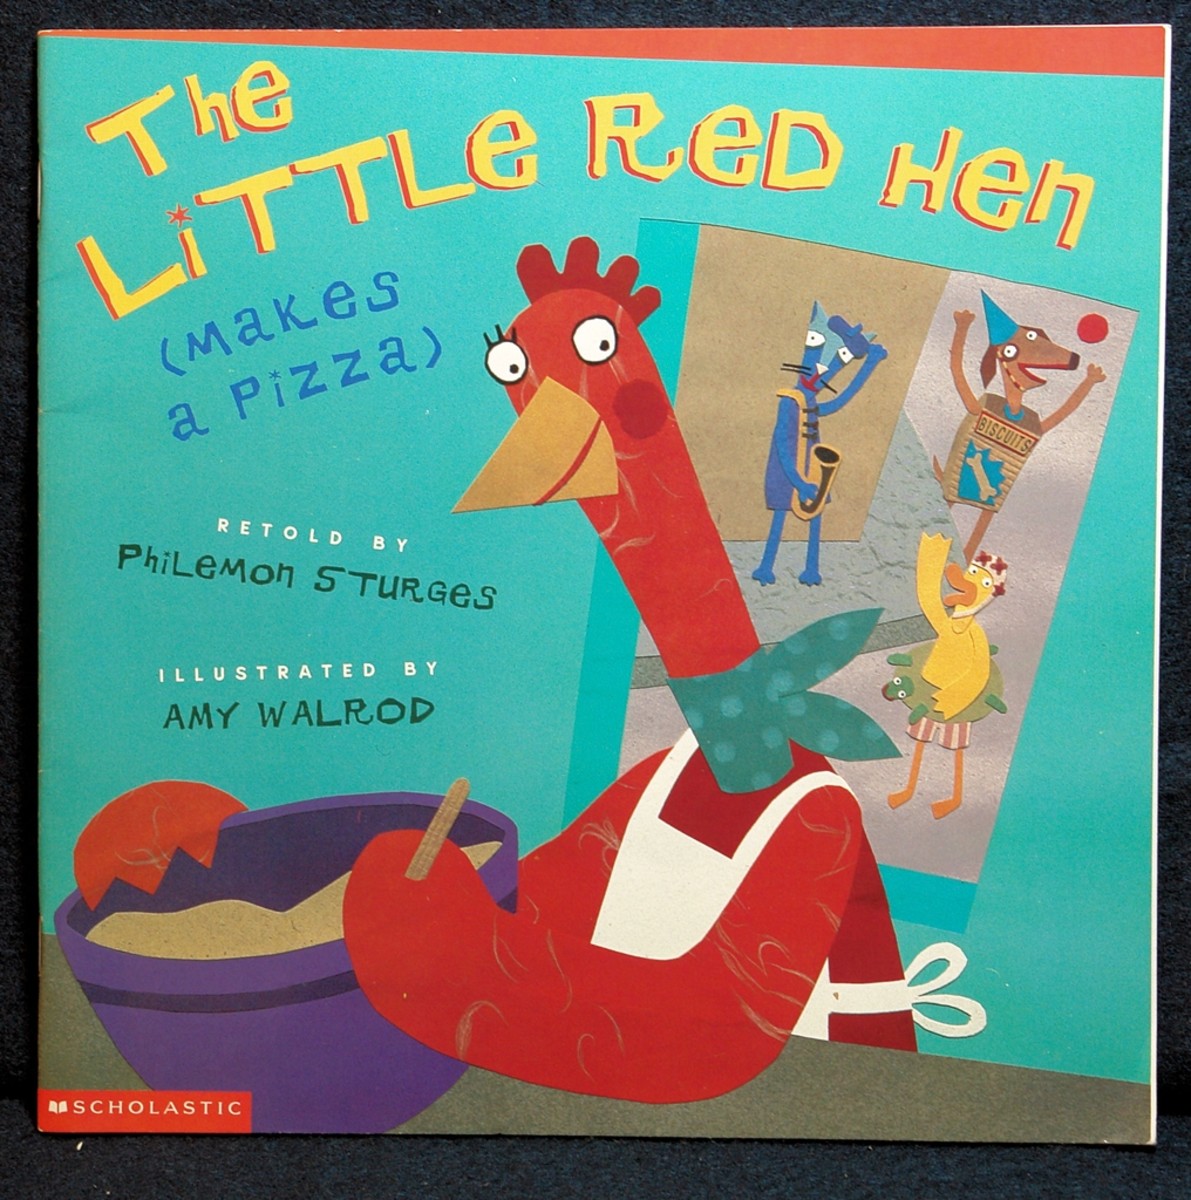 The Little Red Hen Makes A Pizza by Philemon Sturges